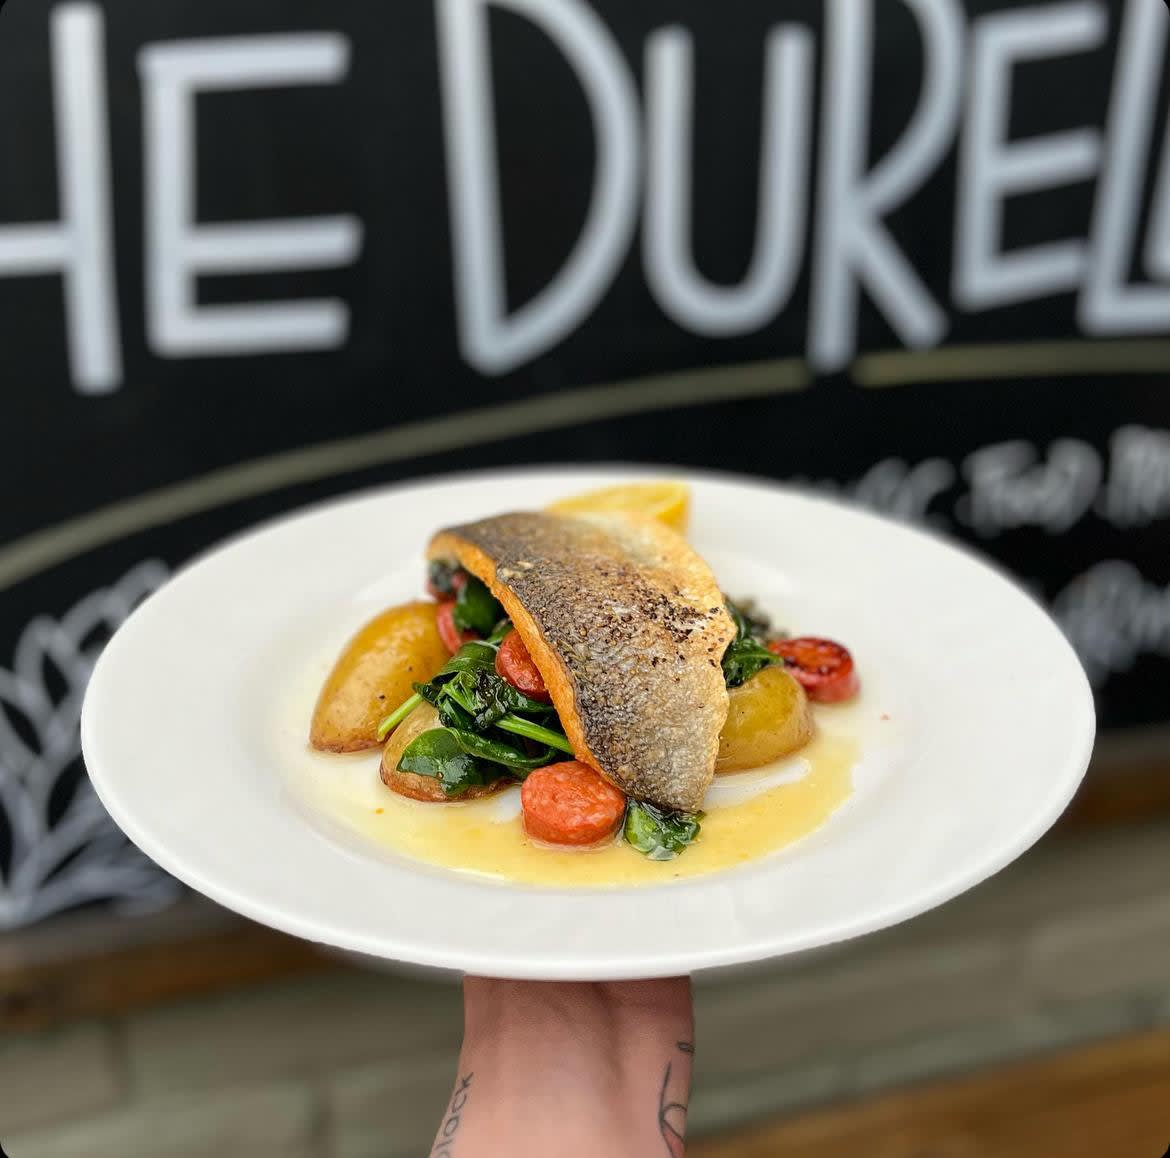 Spring vibes on the plate: Pan-fried seabass served with new potato chorizo and spinach. Fresh flavors, fresh start! 🌱🐟 #SpringMenu #FreshCatch